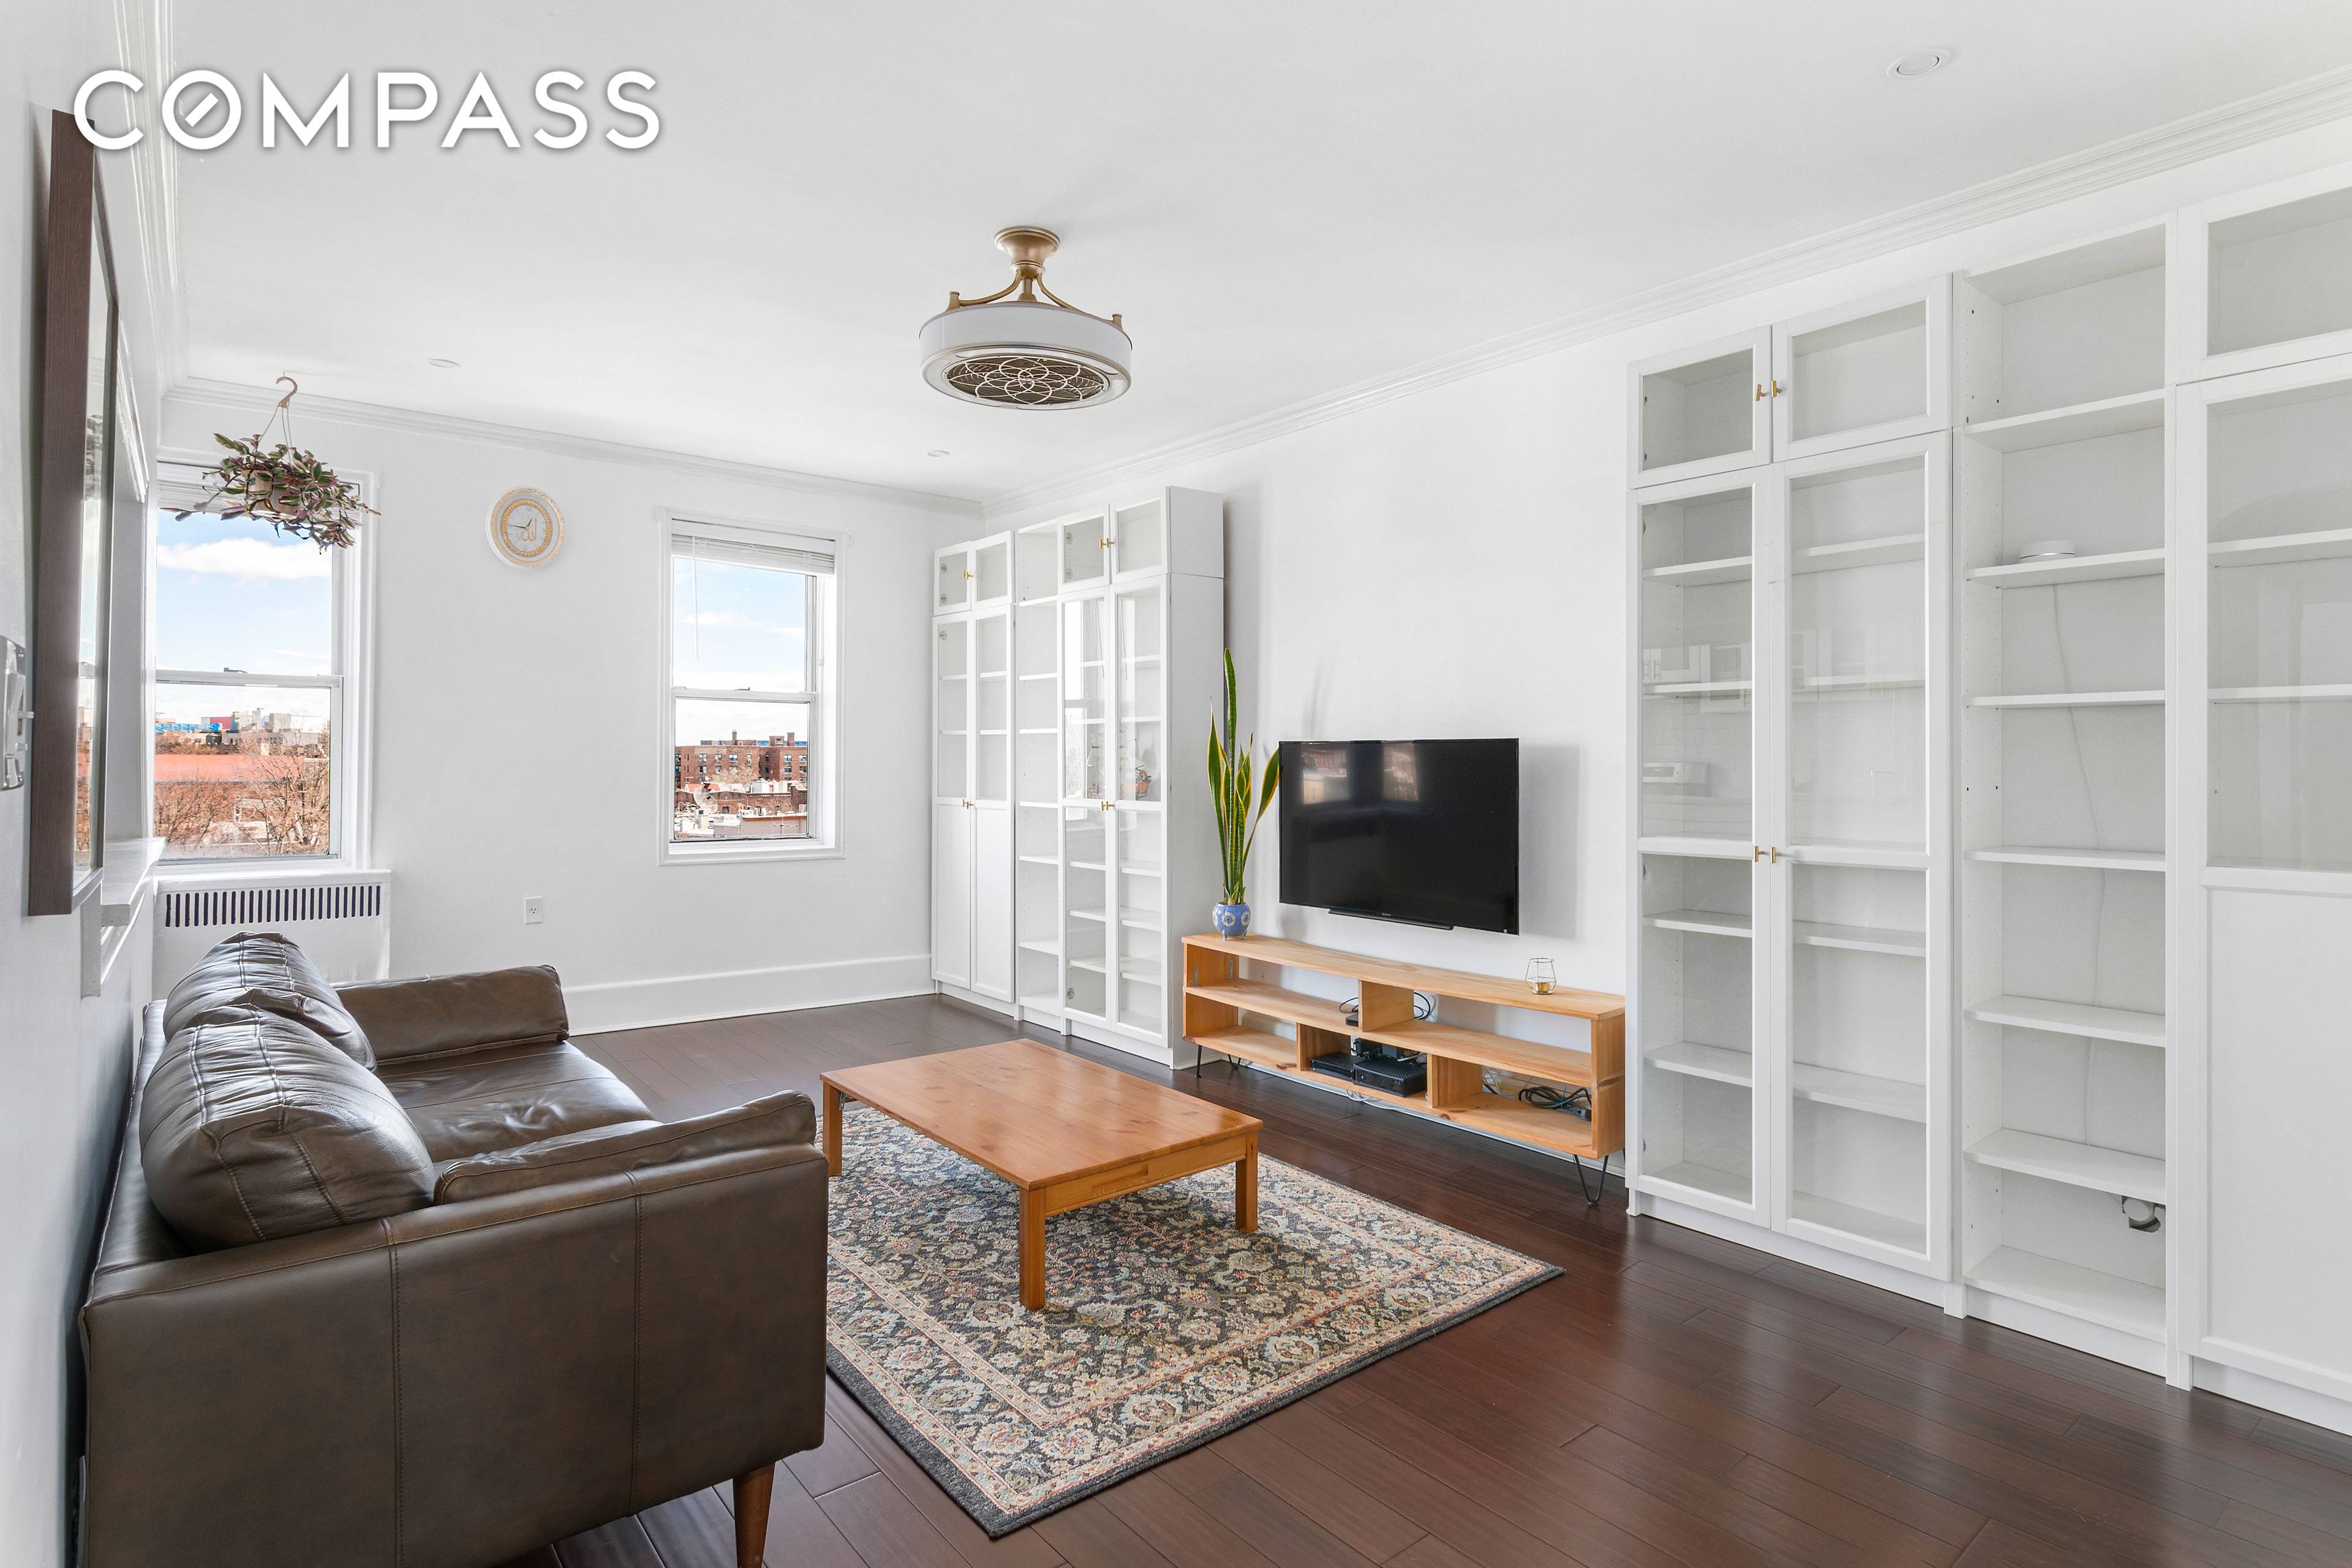 Very Bright, quiet fully gut renovated 1 bedroom with expansive neighborhood views located in one of the most most sought after and well maintained pre war buildings in charming Windsor ...